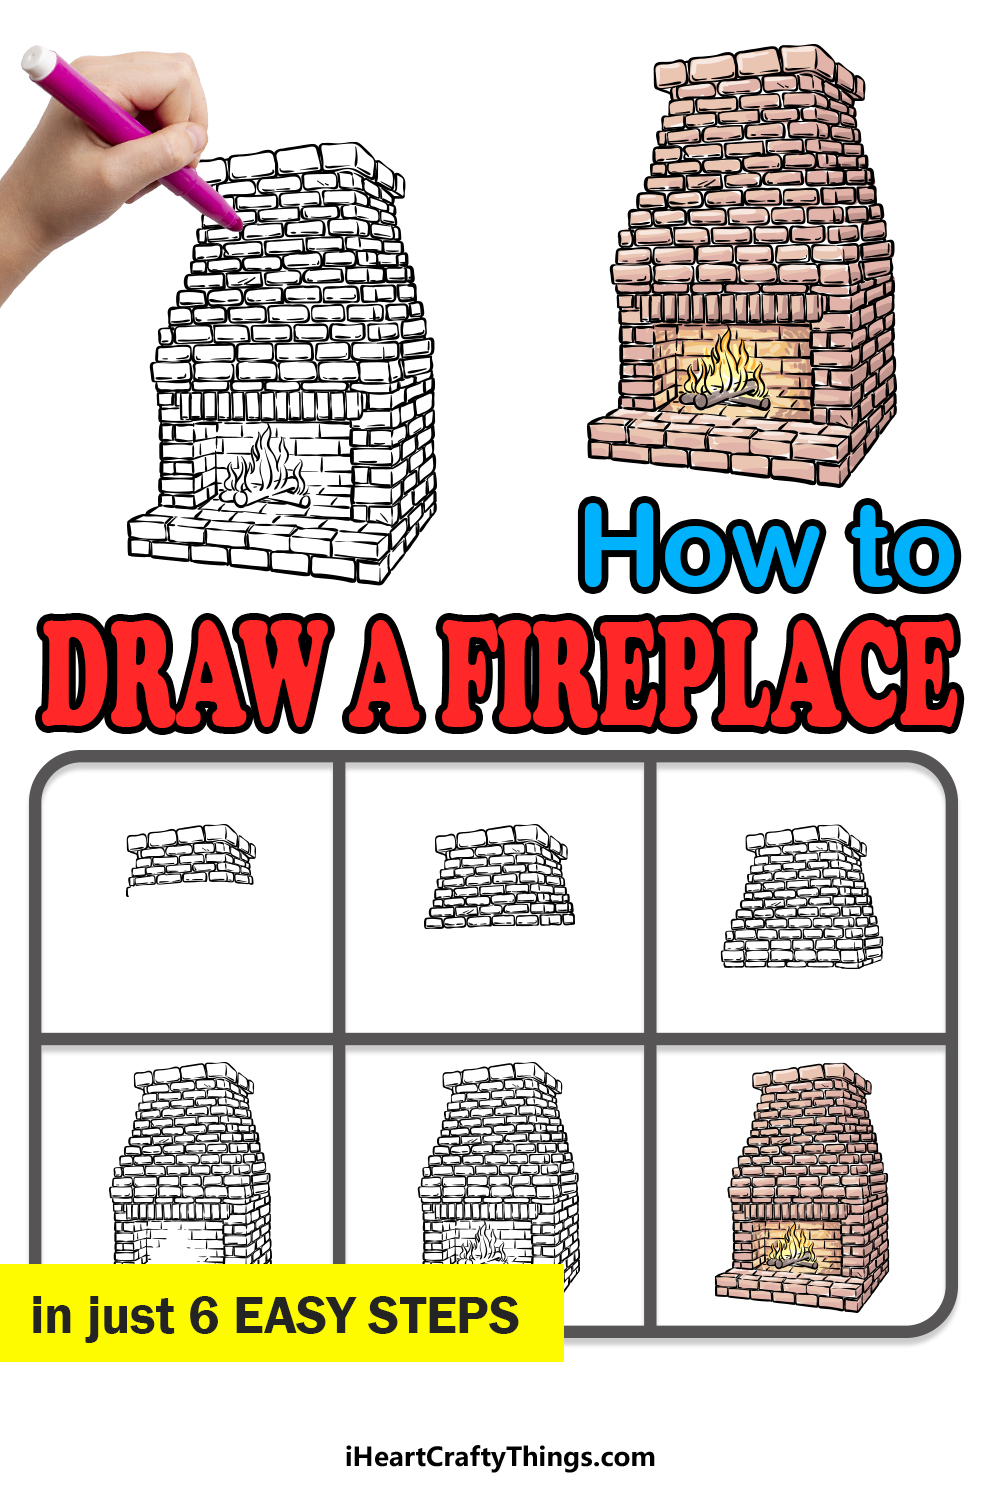 how to draw a Fireplace in 6 easy steps